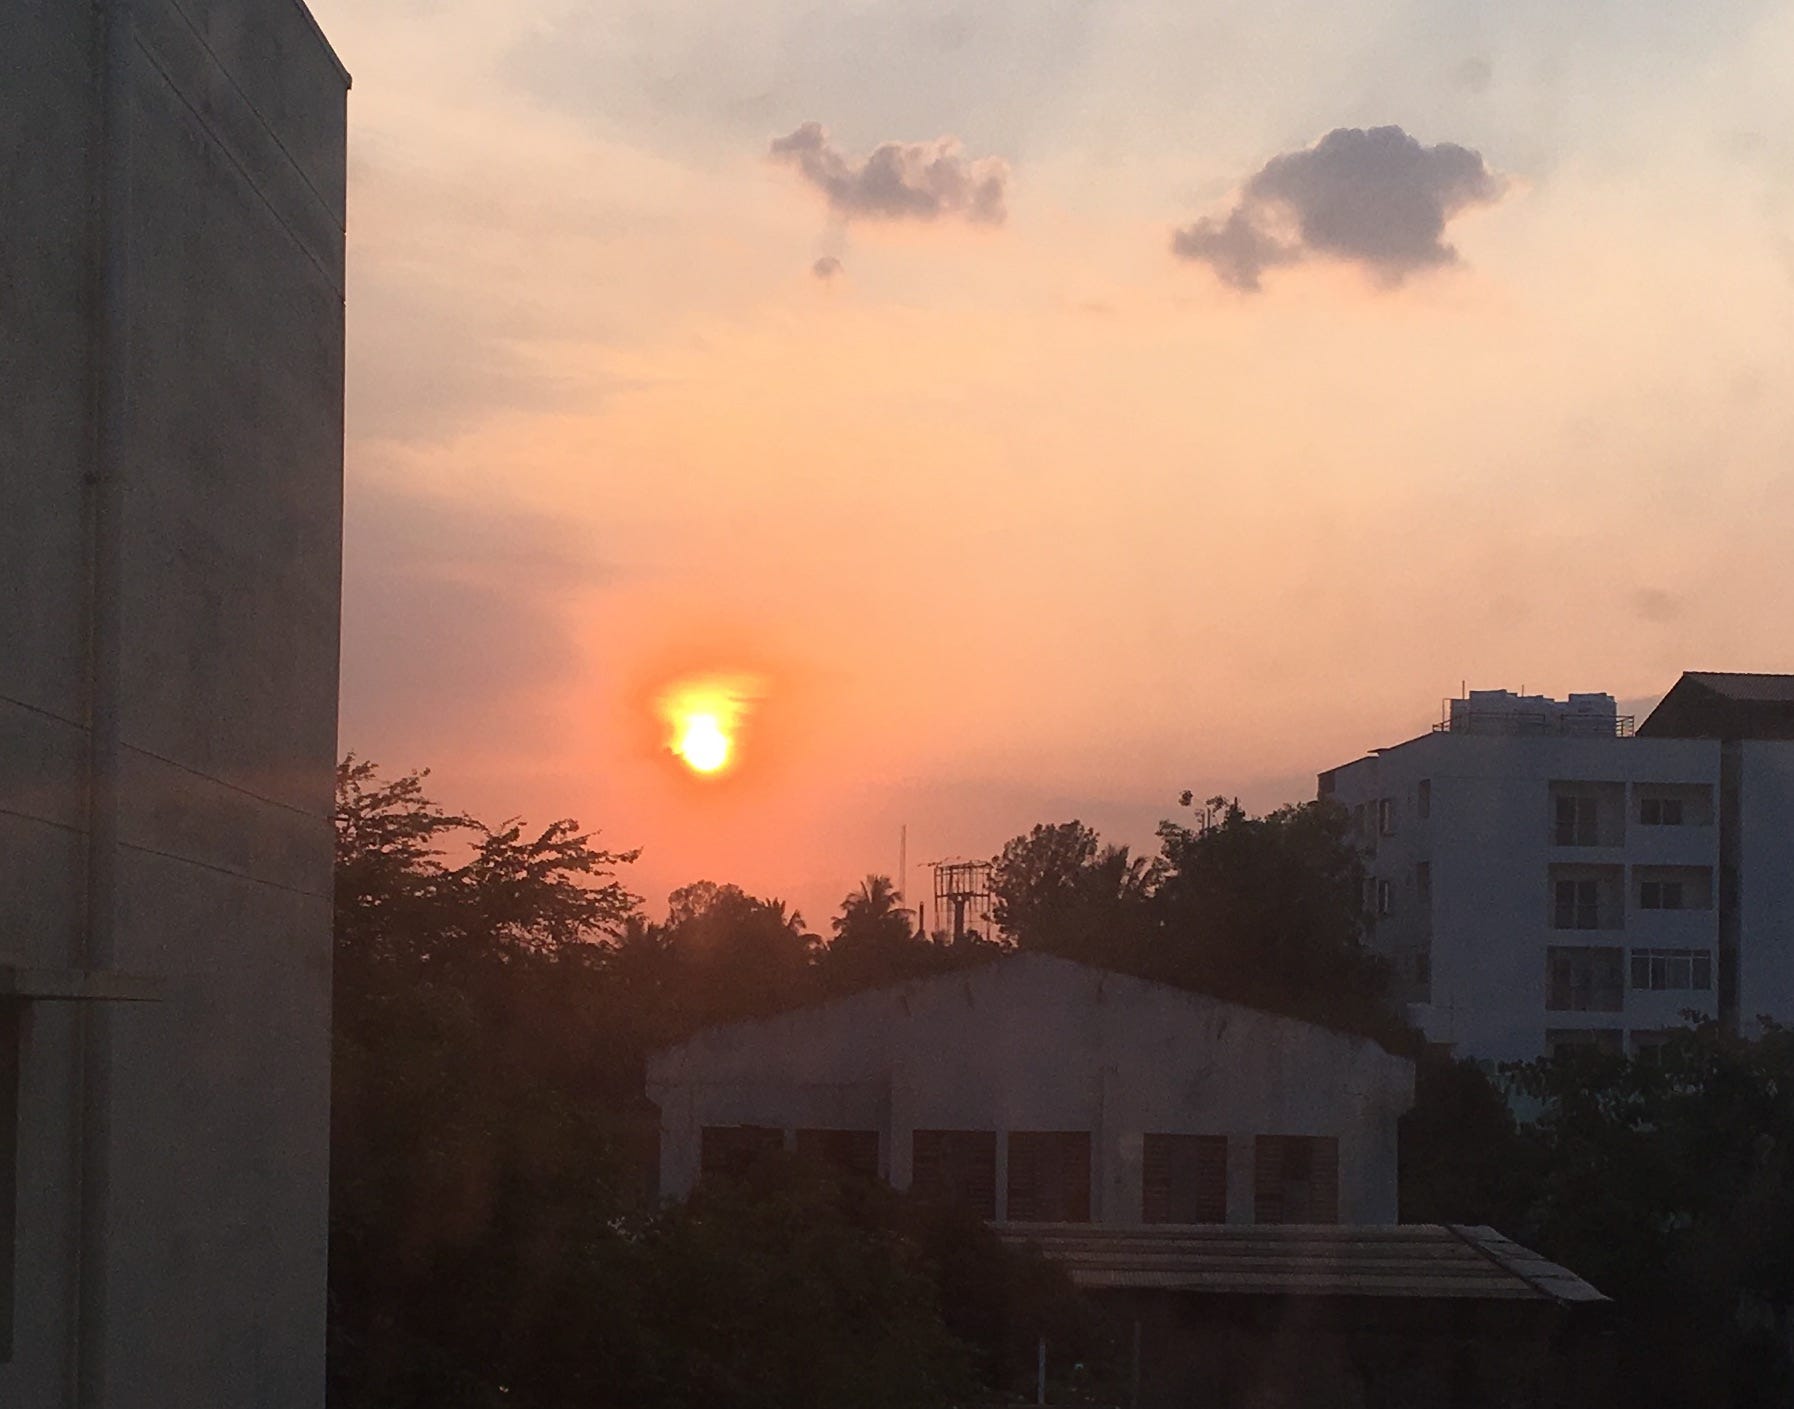 An atmosphere-induced smudgy looking Sun, which is about to set, as viewed from a residential area.